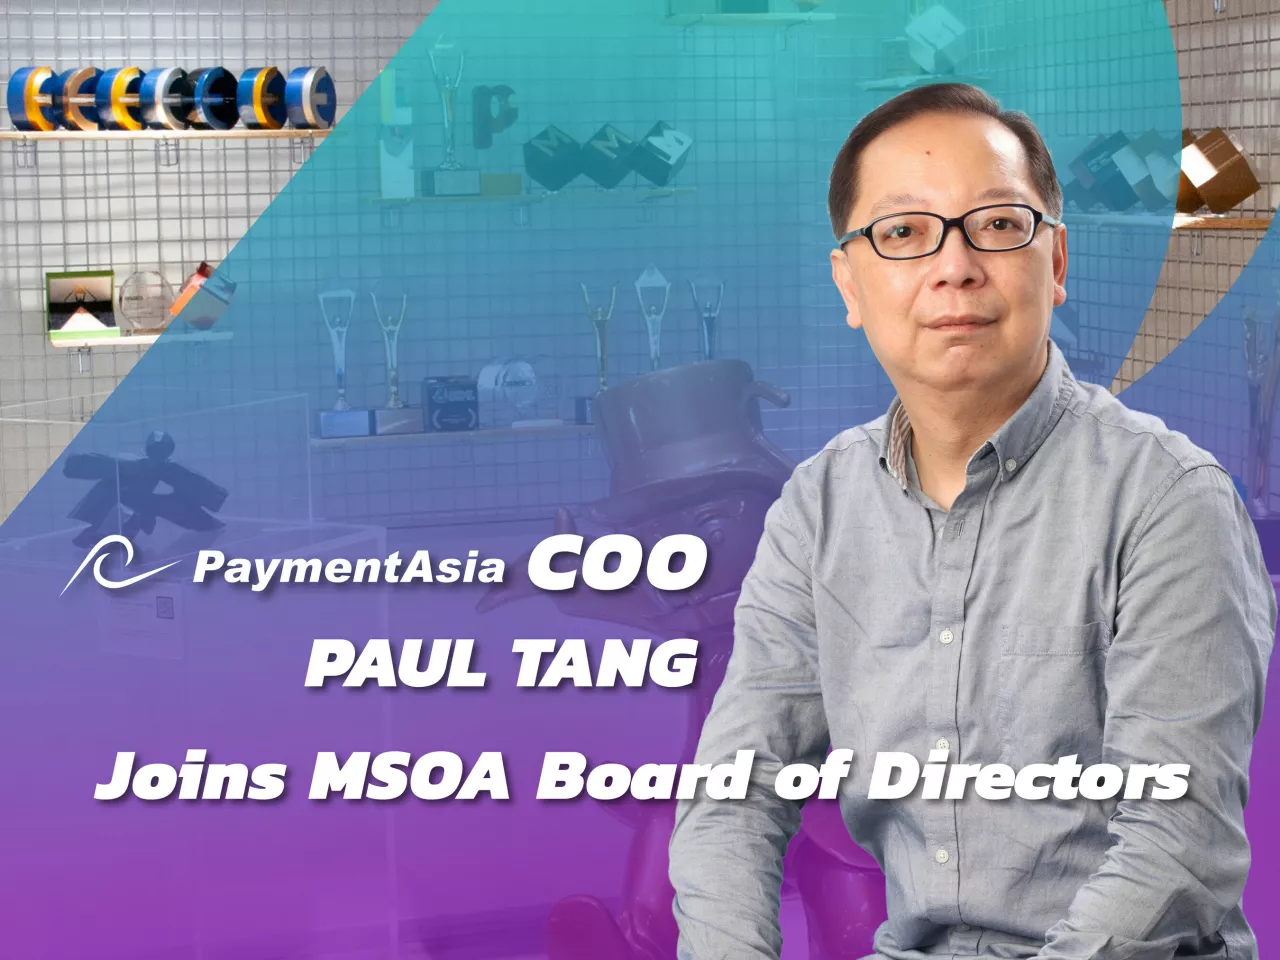 Payment Asia COO Paul Tang joins the board of MSOA img#1